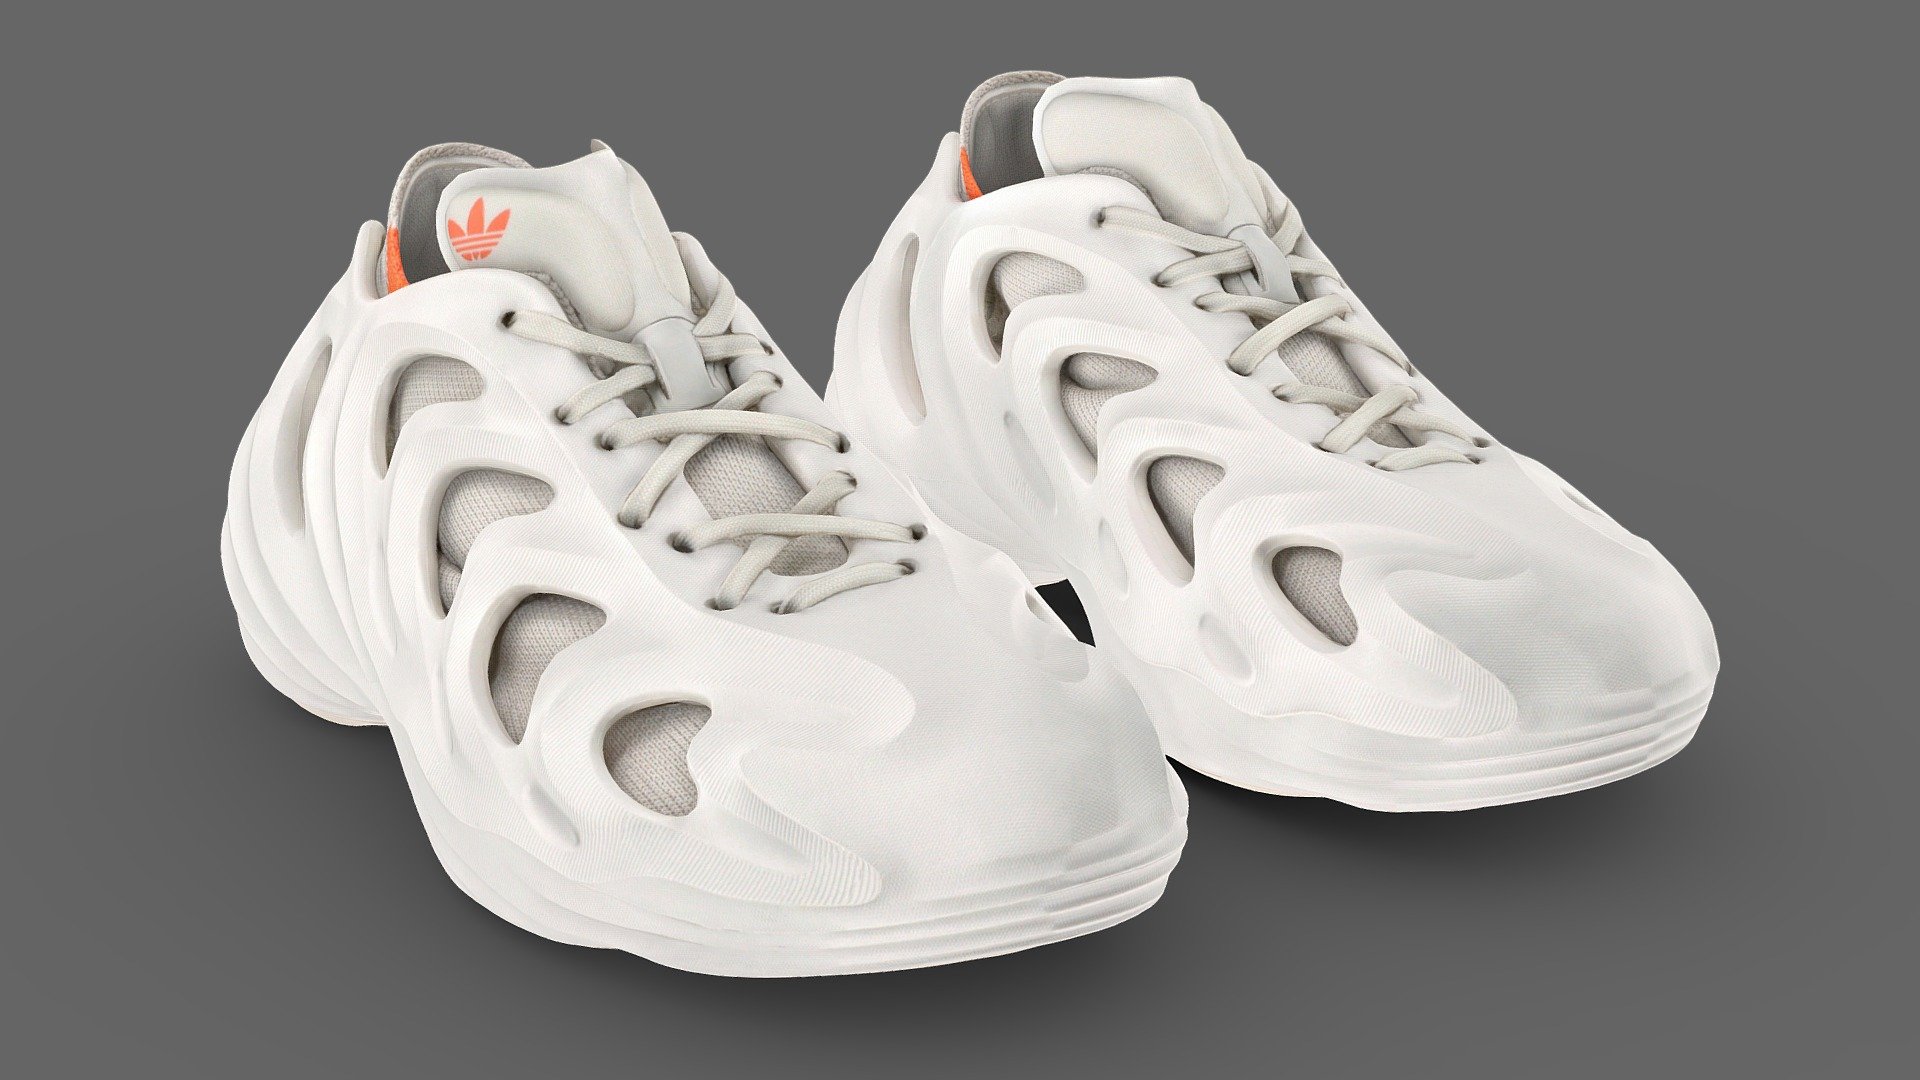 Promotion:Pick any 10 of sneakers for $150.Pick any 5 of sneakers for $90.

A Very Detailed scanned shoes with High-Quality .Reay to use in virtual try on project and game sim 4 or second life.

The Mesh is UV unwrapped.The length of all my shoes is about 24cm.

4096x4096 difuse Texture Map jpg format，in the compressed file rar.

The textures is lighting baked,the texture is uploaded to preview images.

File contains :

FBX .OBJ .stl.collada(dae).Difuse map Texture(jpg format).

If you want to change the colorway of the shoes, it is easy to do it with photopshop. If you want to change the colorway or decrease the polycourt ,I am willing to do it.

This is a professional scanning agency, if you want any other shoes, Don't hesitate to tell me.It will helps a lot.we are available for custom shoes scan.

Don't forget to check my other sneakers,Have a nice day：） - Adidas Originals Adi FOM Q slipper - Buy Royalty Free 3D model by Vincent Page (@vincentpage) 3d model